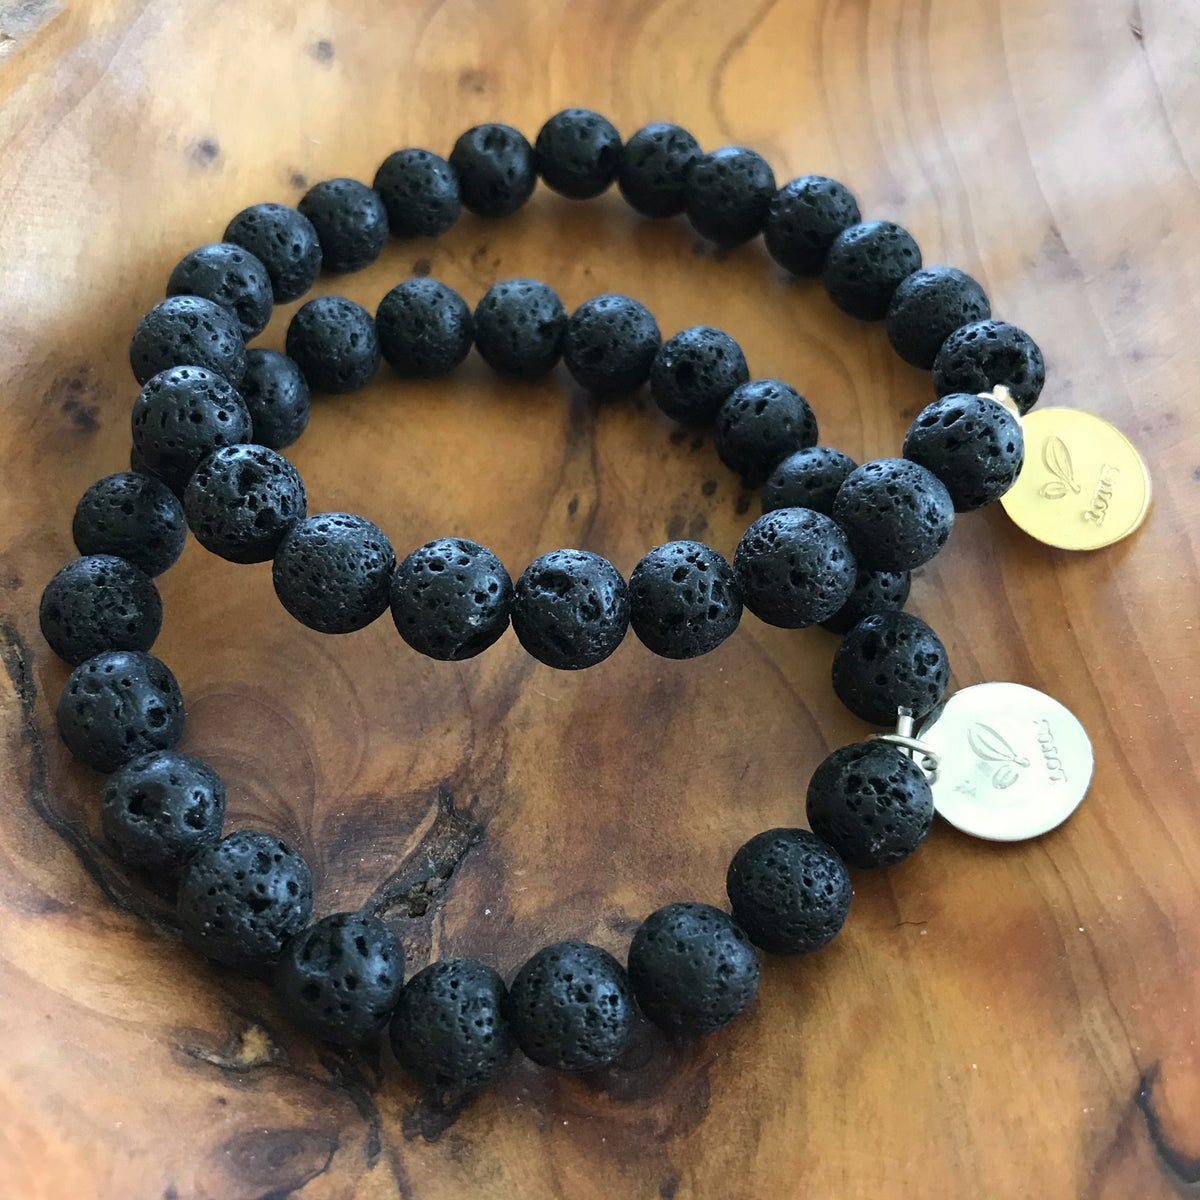 Pair of Black Lava Rock Essential Oil Aromatherapy Diffuser Bracelets by Lotus Jewelry Studio